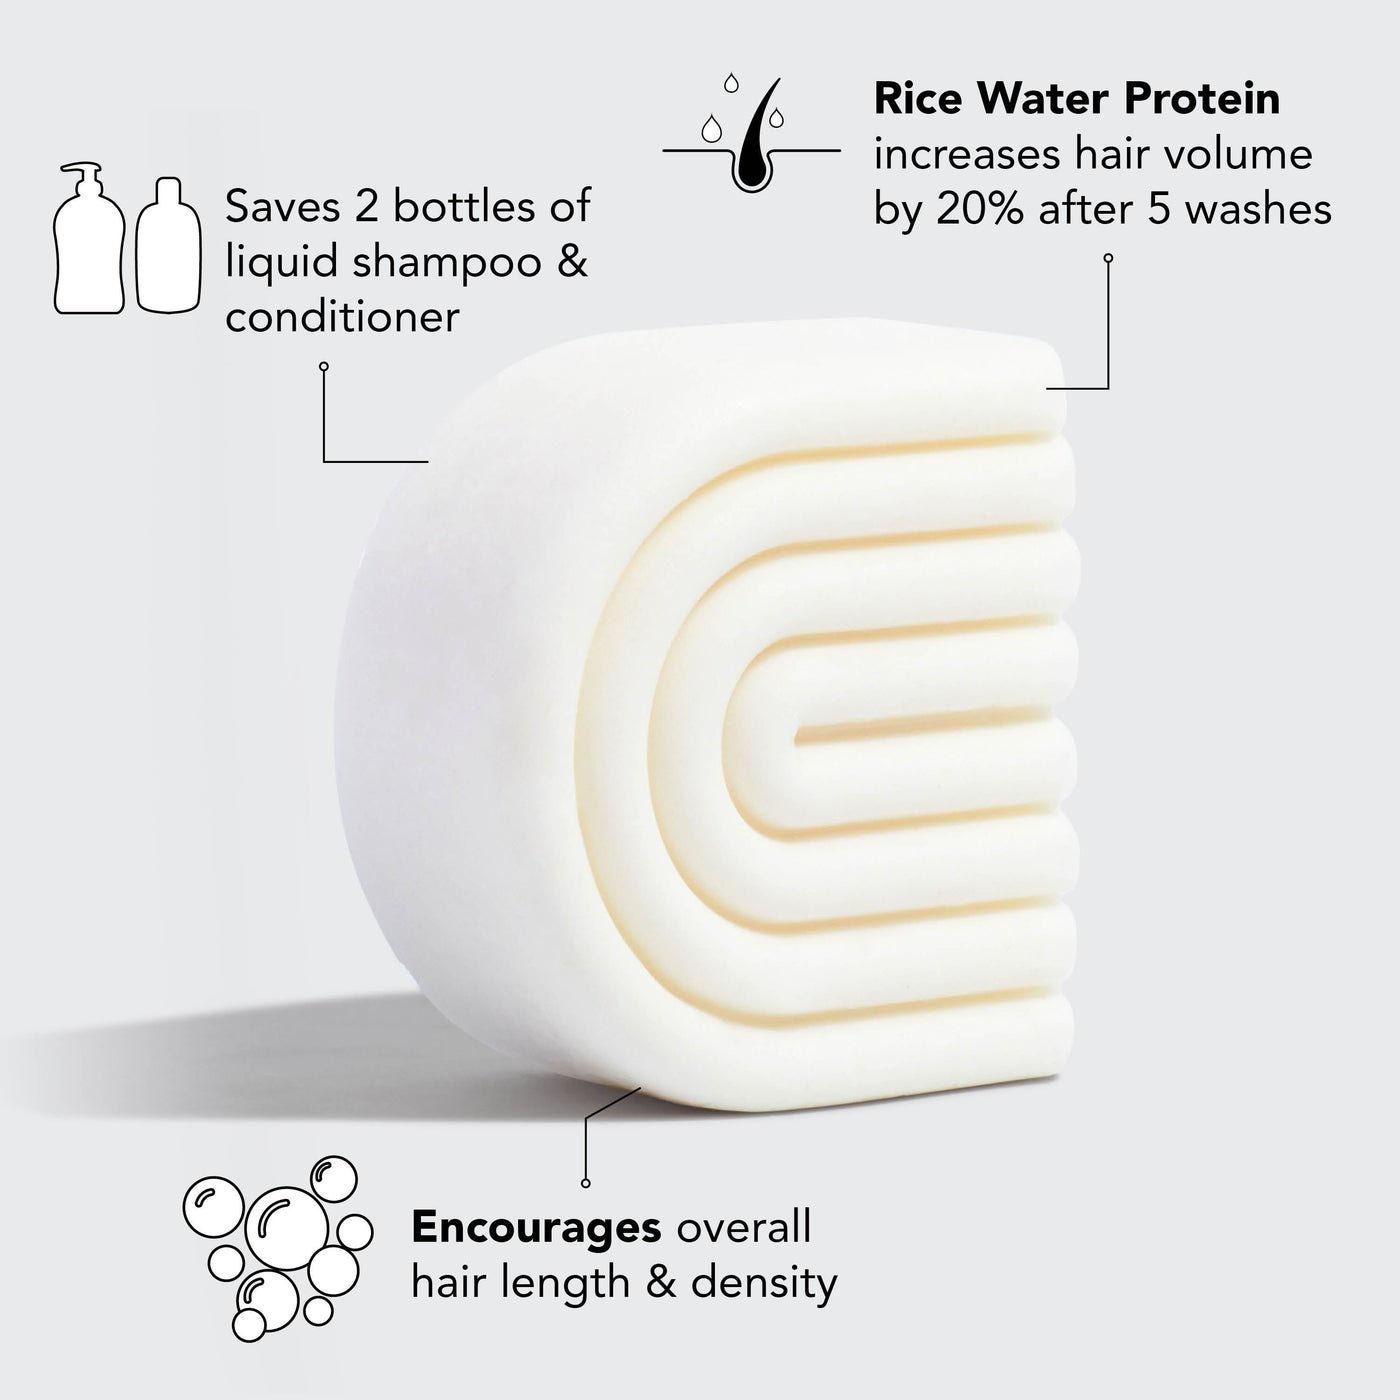 Kitsch Rice Water Protein Conditioner Bar For Hair Growth